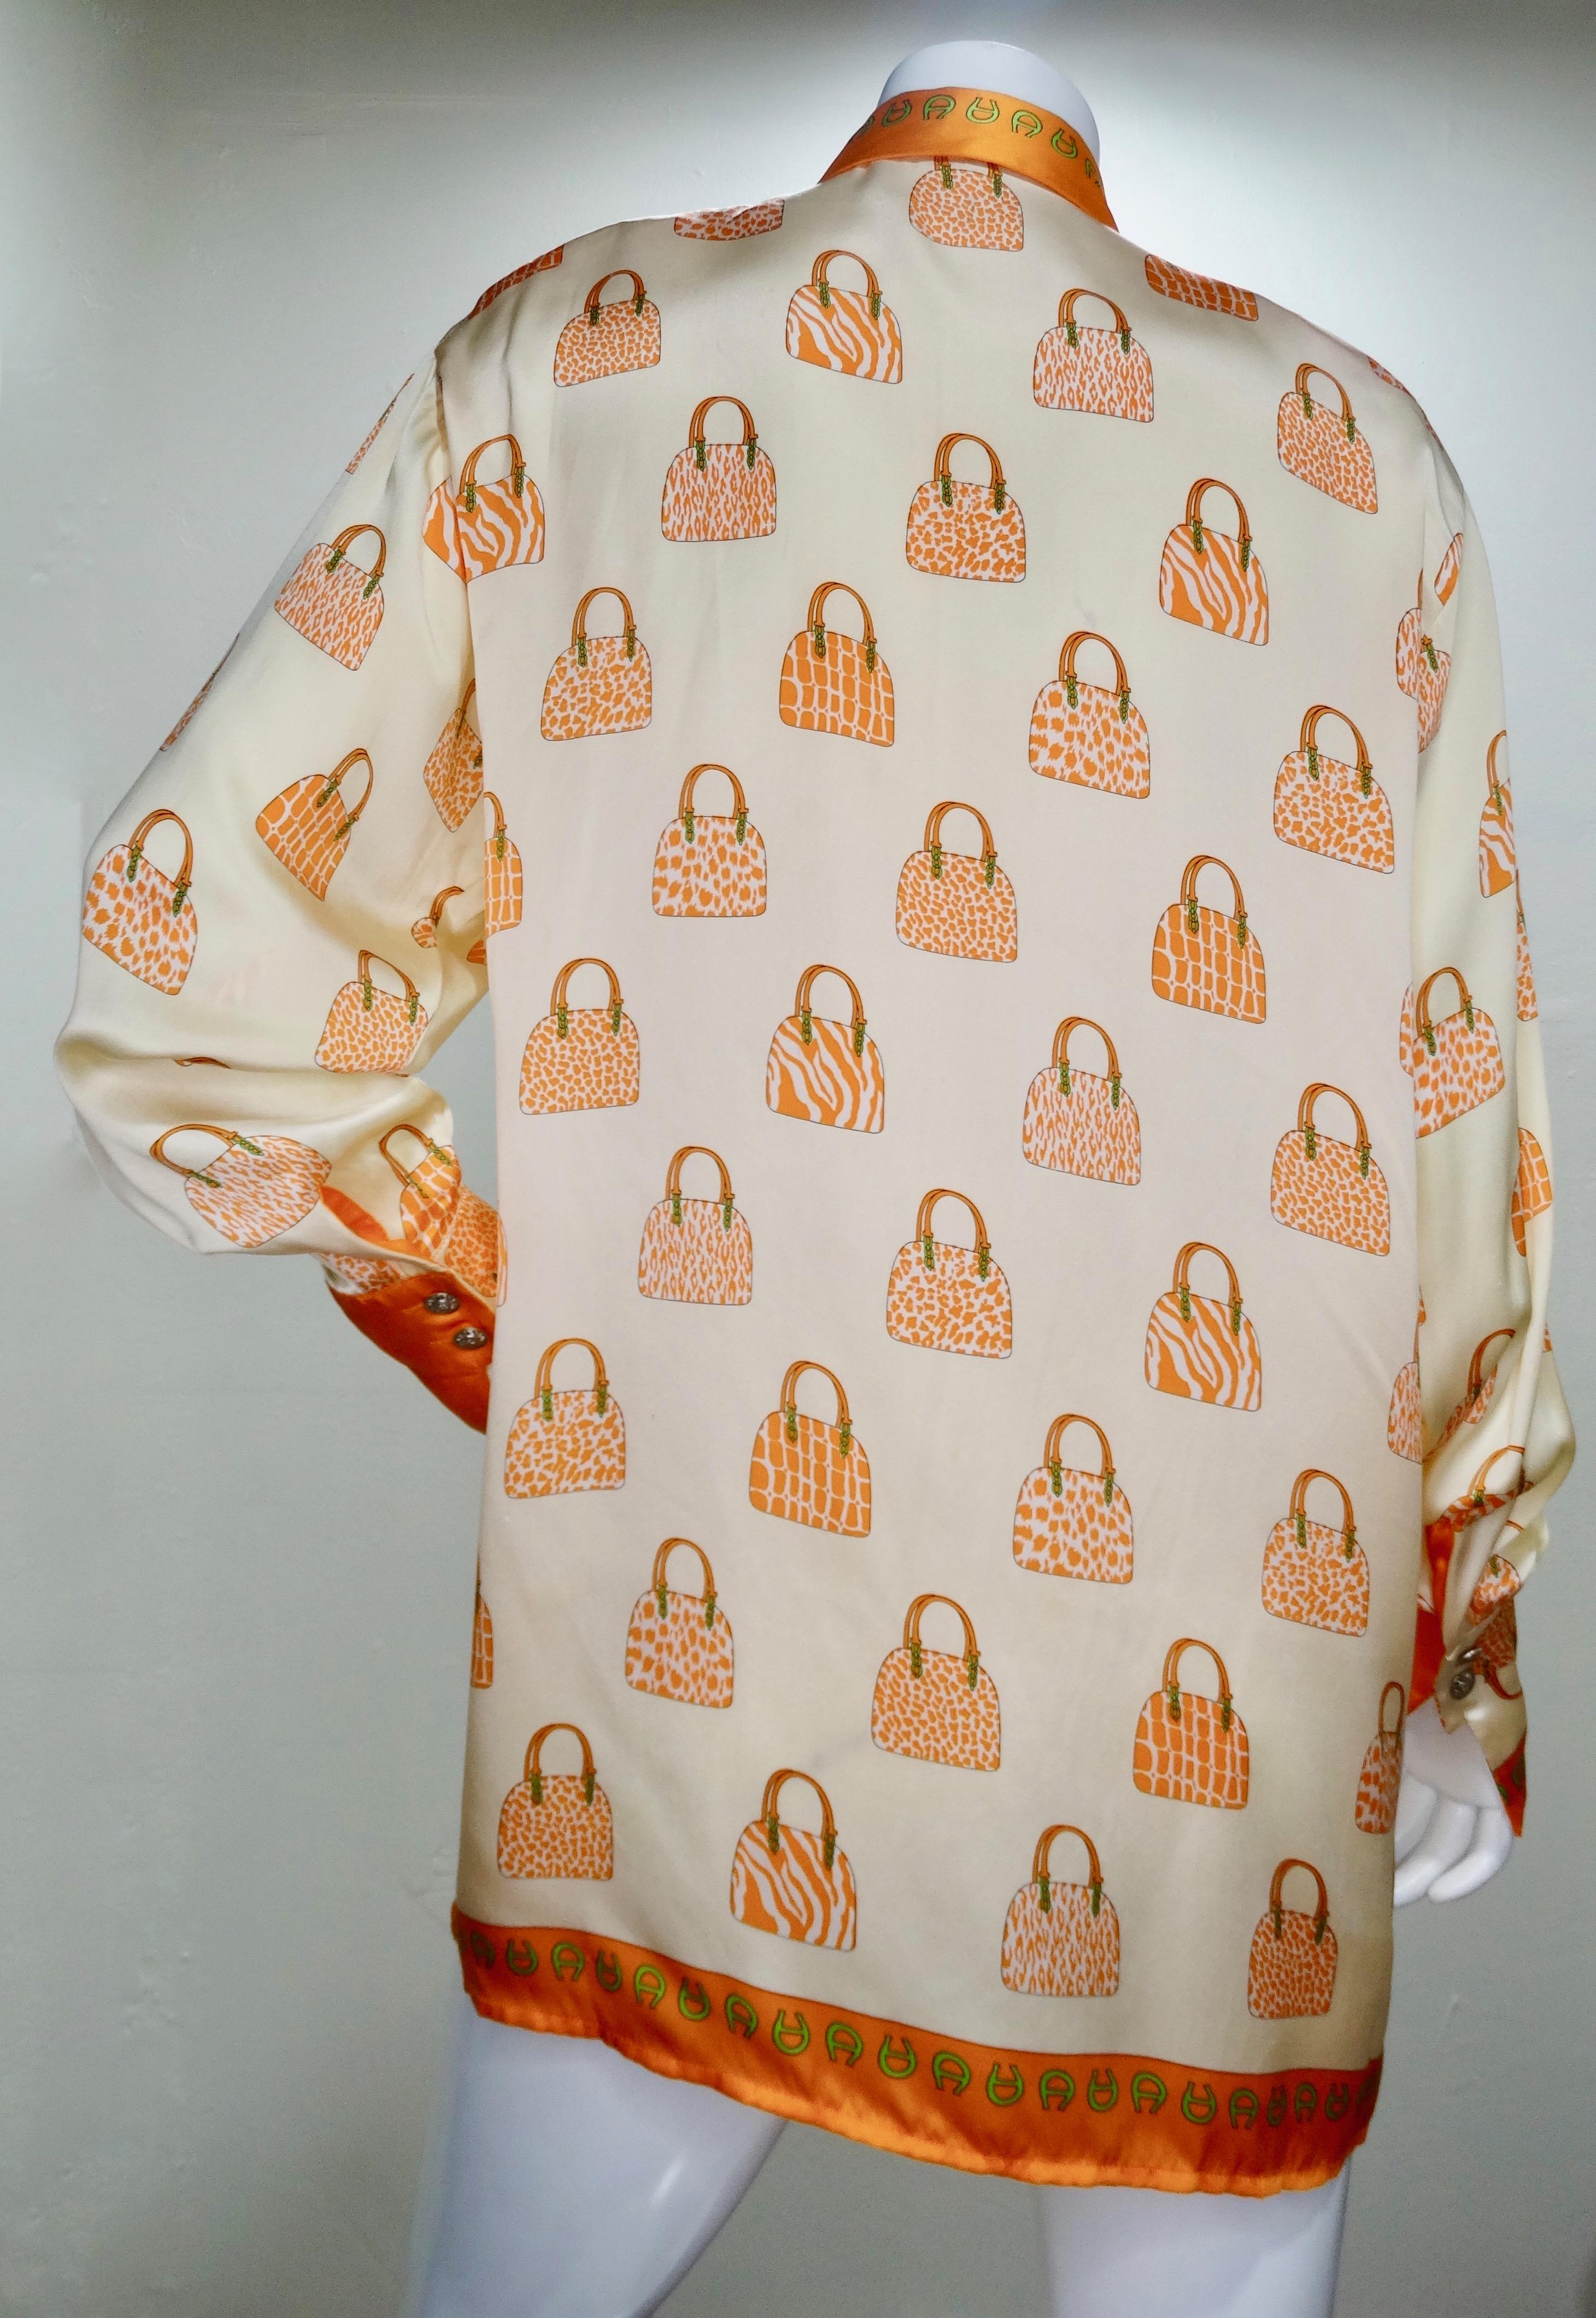 Circa early 1990s, this shiny cream colored Silk button down shirt features a motif detailing handbags with various animal prints. Features an orange trim and strong shoulders. Includes a hidden button down front, traditional collar and embossed V2